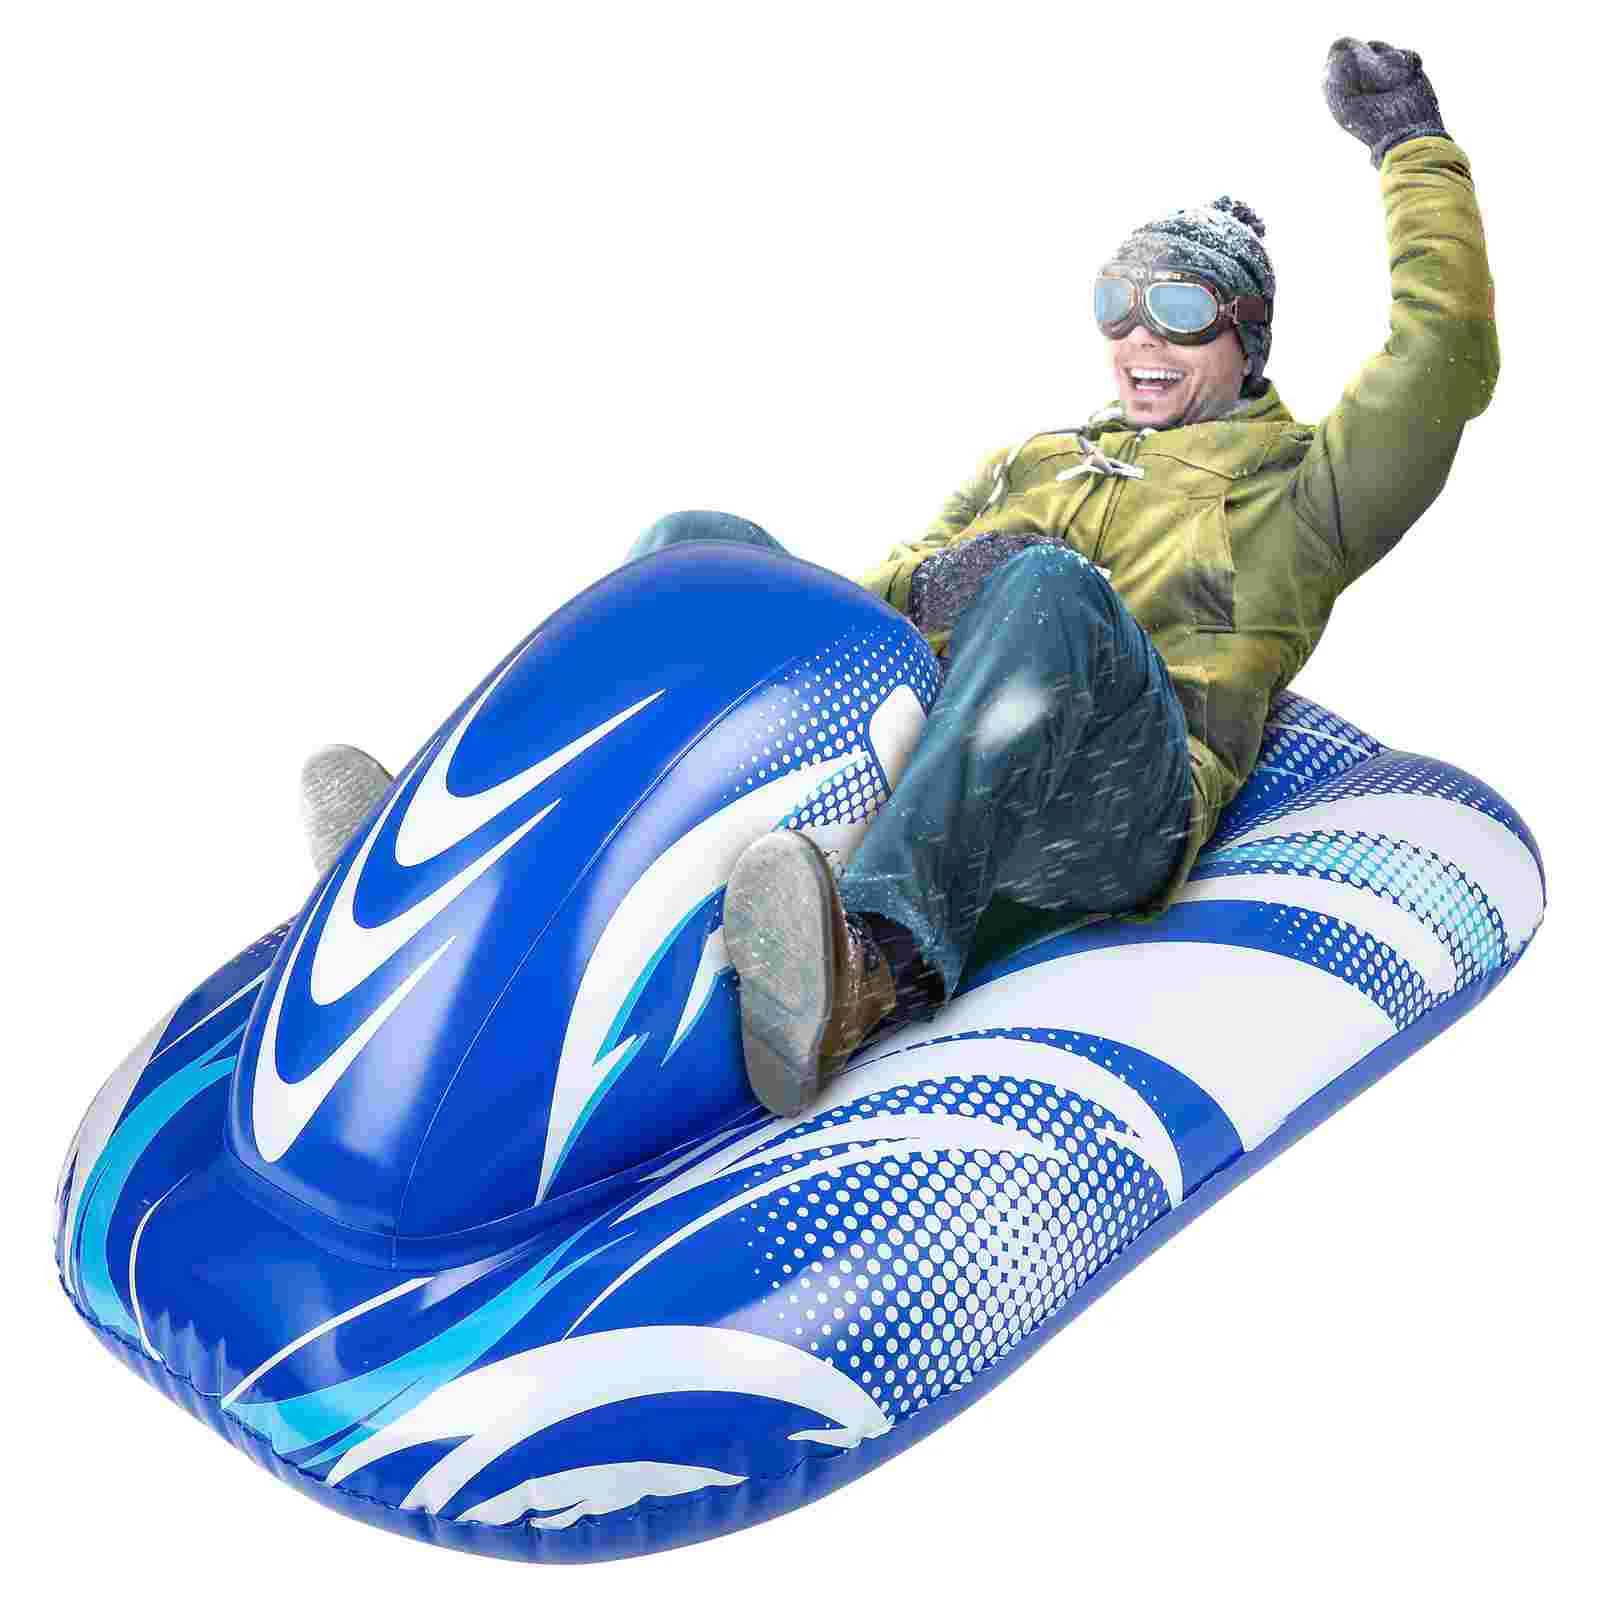 

Clispeed Inflatable Snow Sled Winter Snow Racer Snow Rider for Kids Adults with Heavy Duty Handles (Blue)